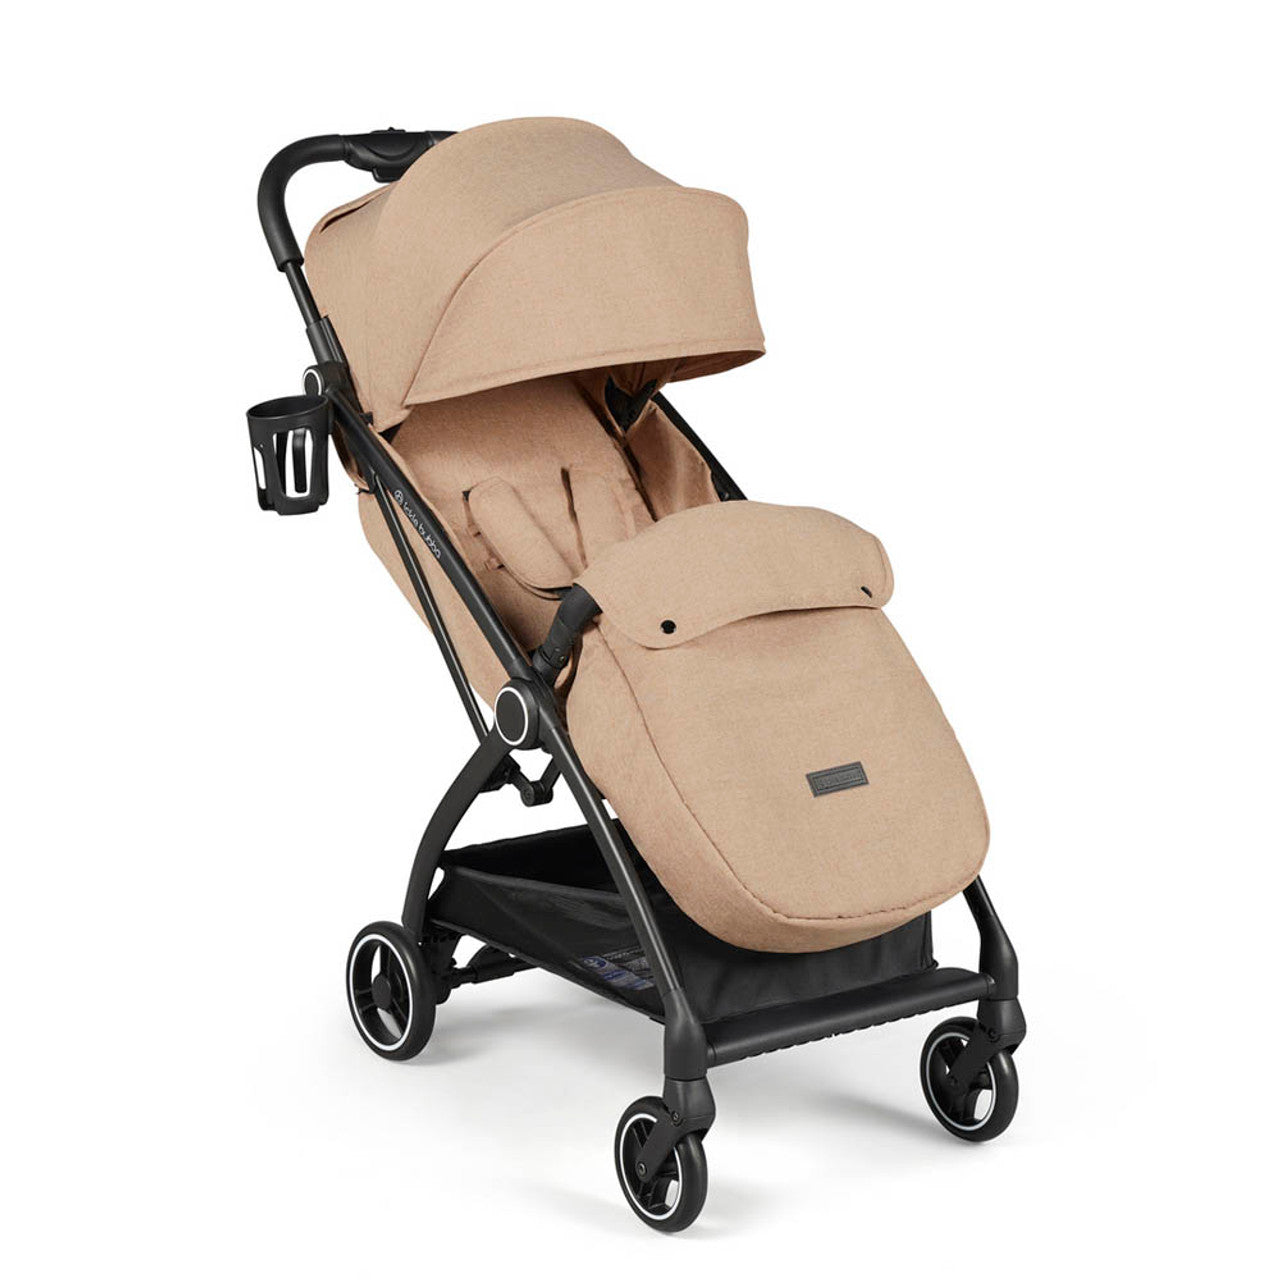 Ickle Bubba Aries Max Autofold Stroller - Biscuit - For Your Little One